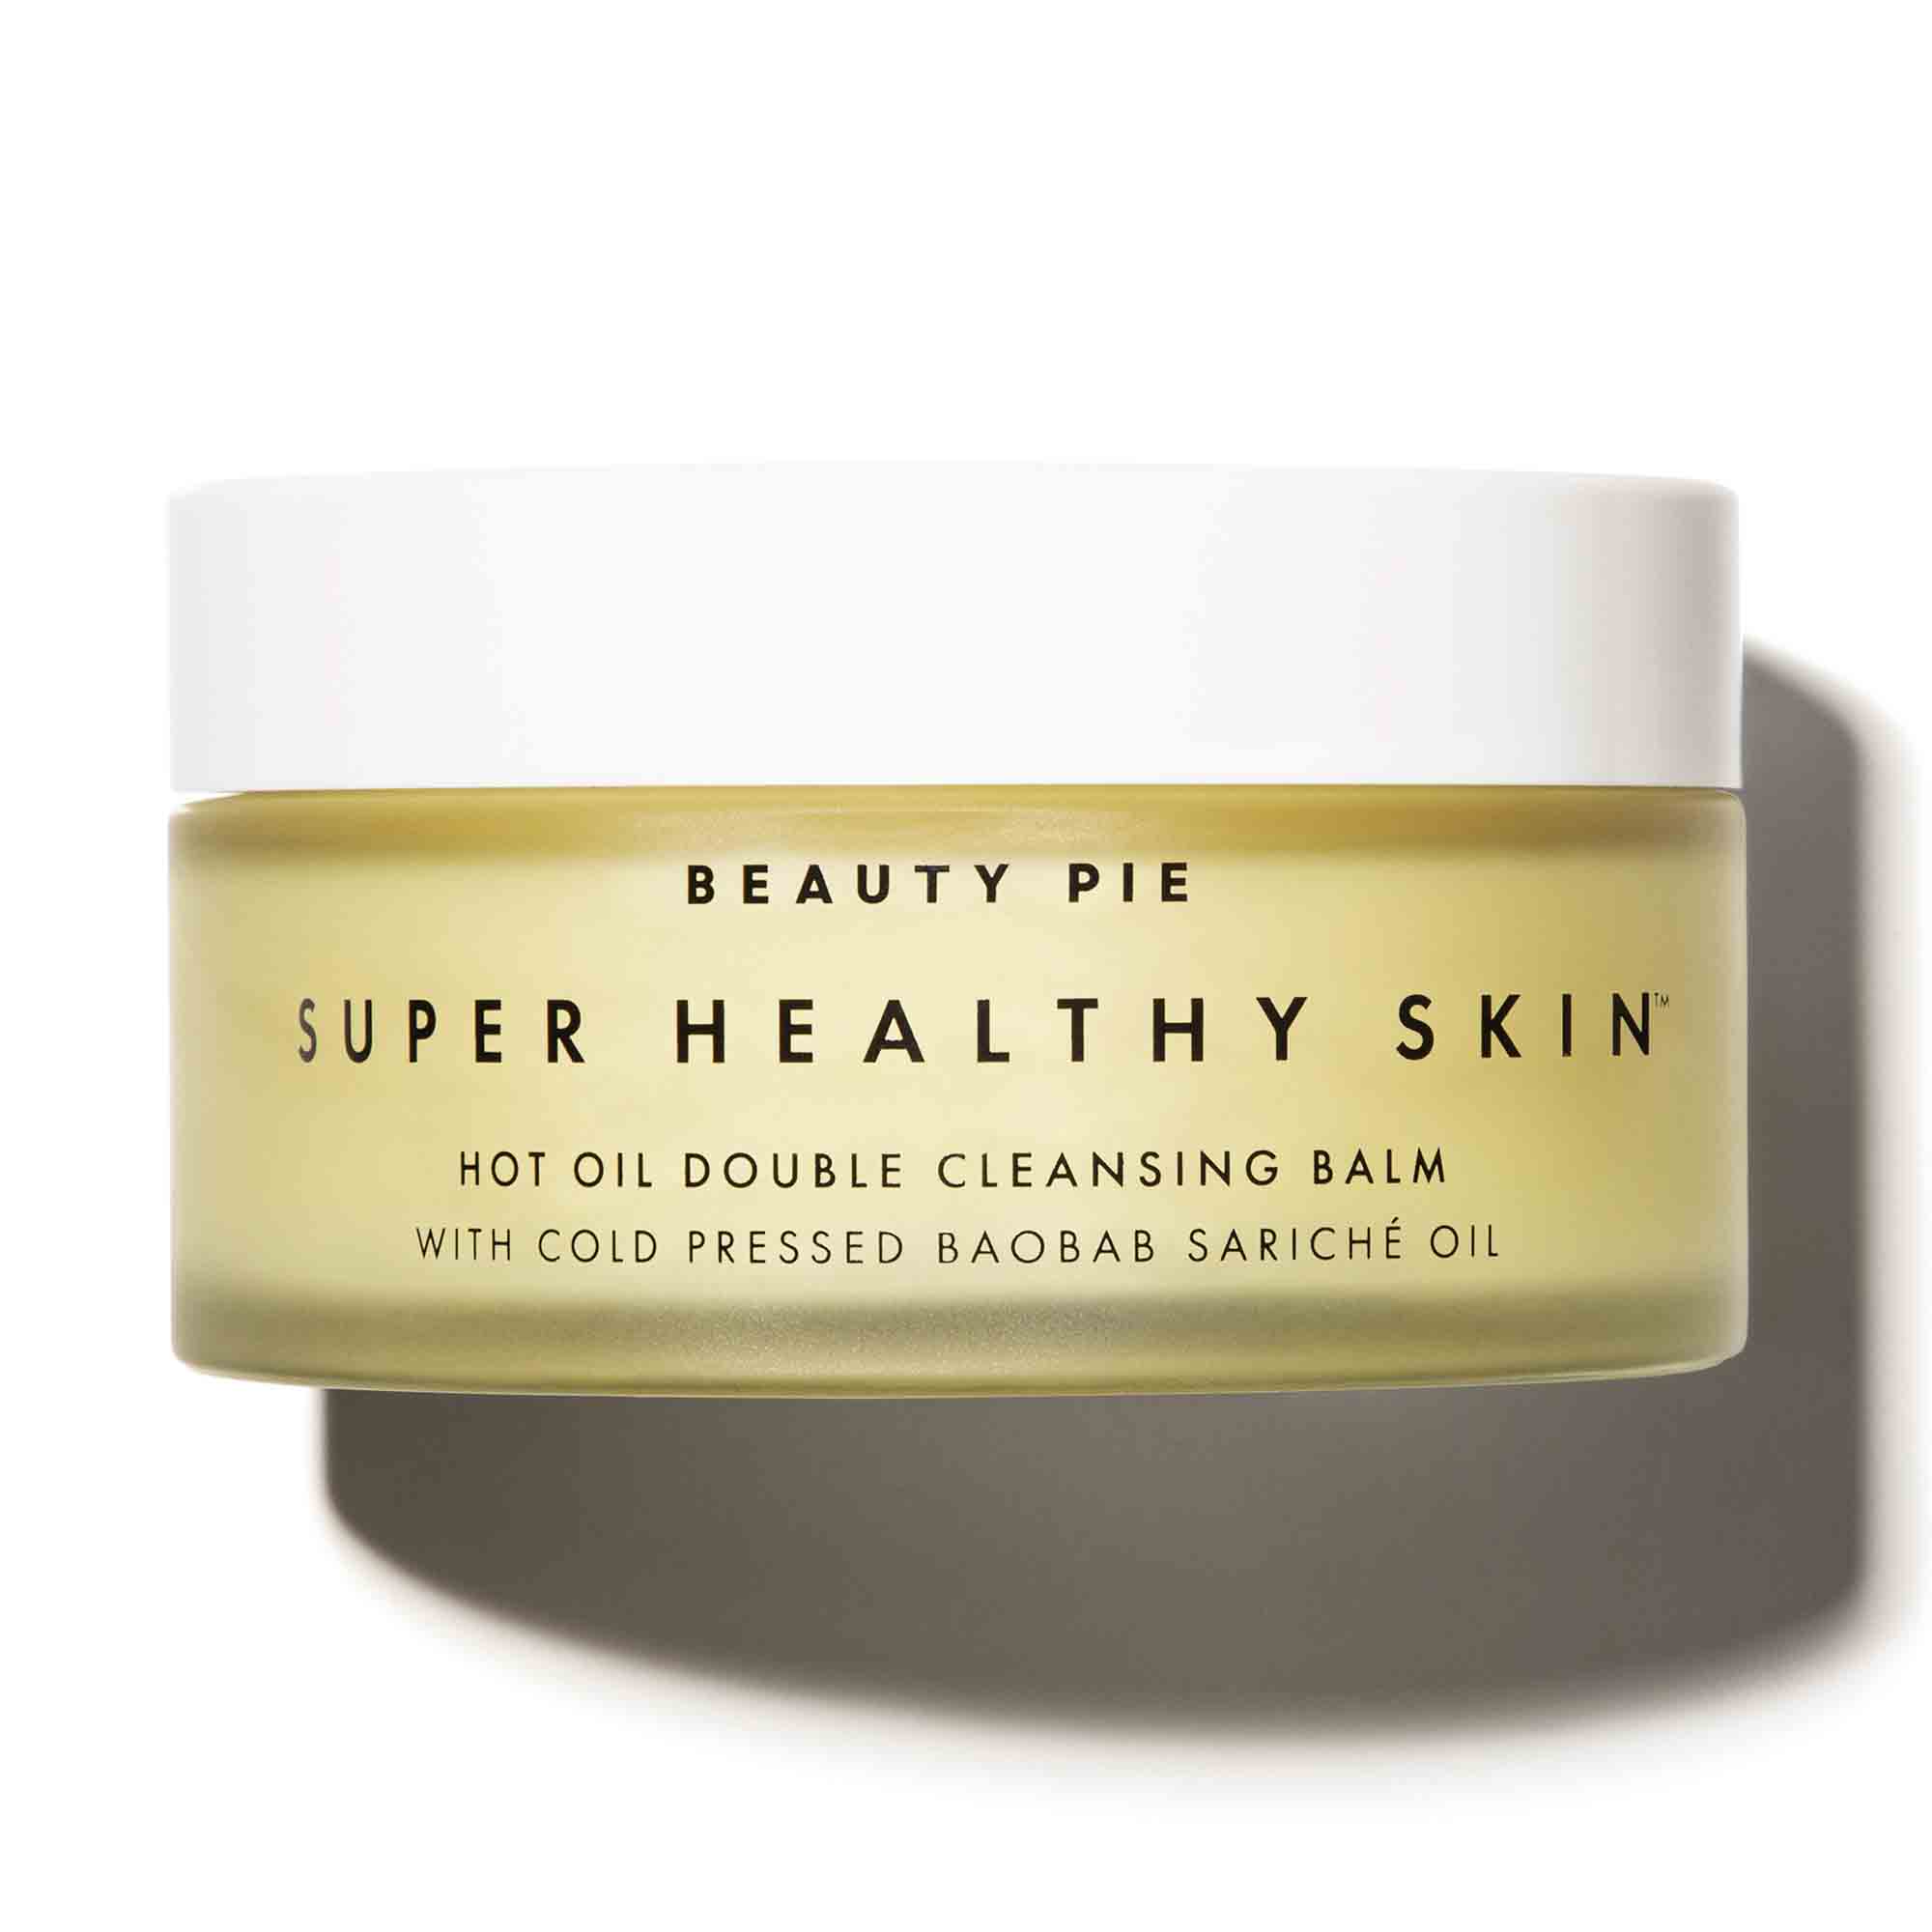 Super Healthy Skin Hot Oil Double Cleansing Balm